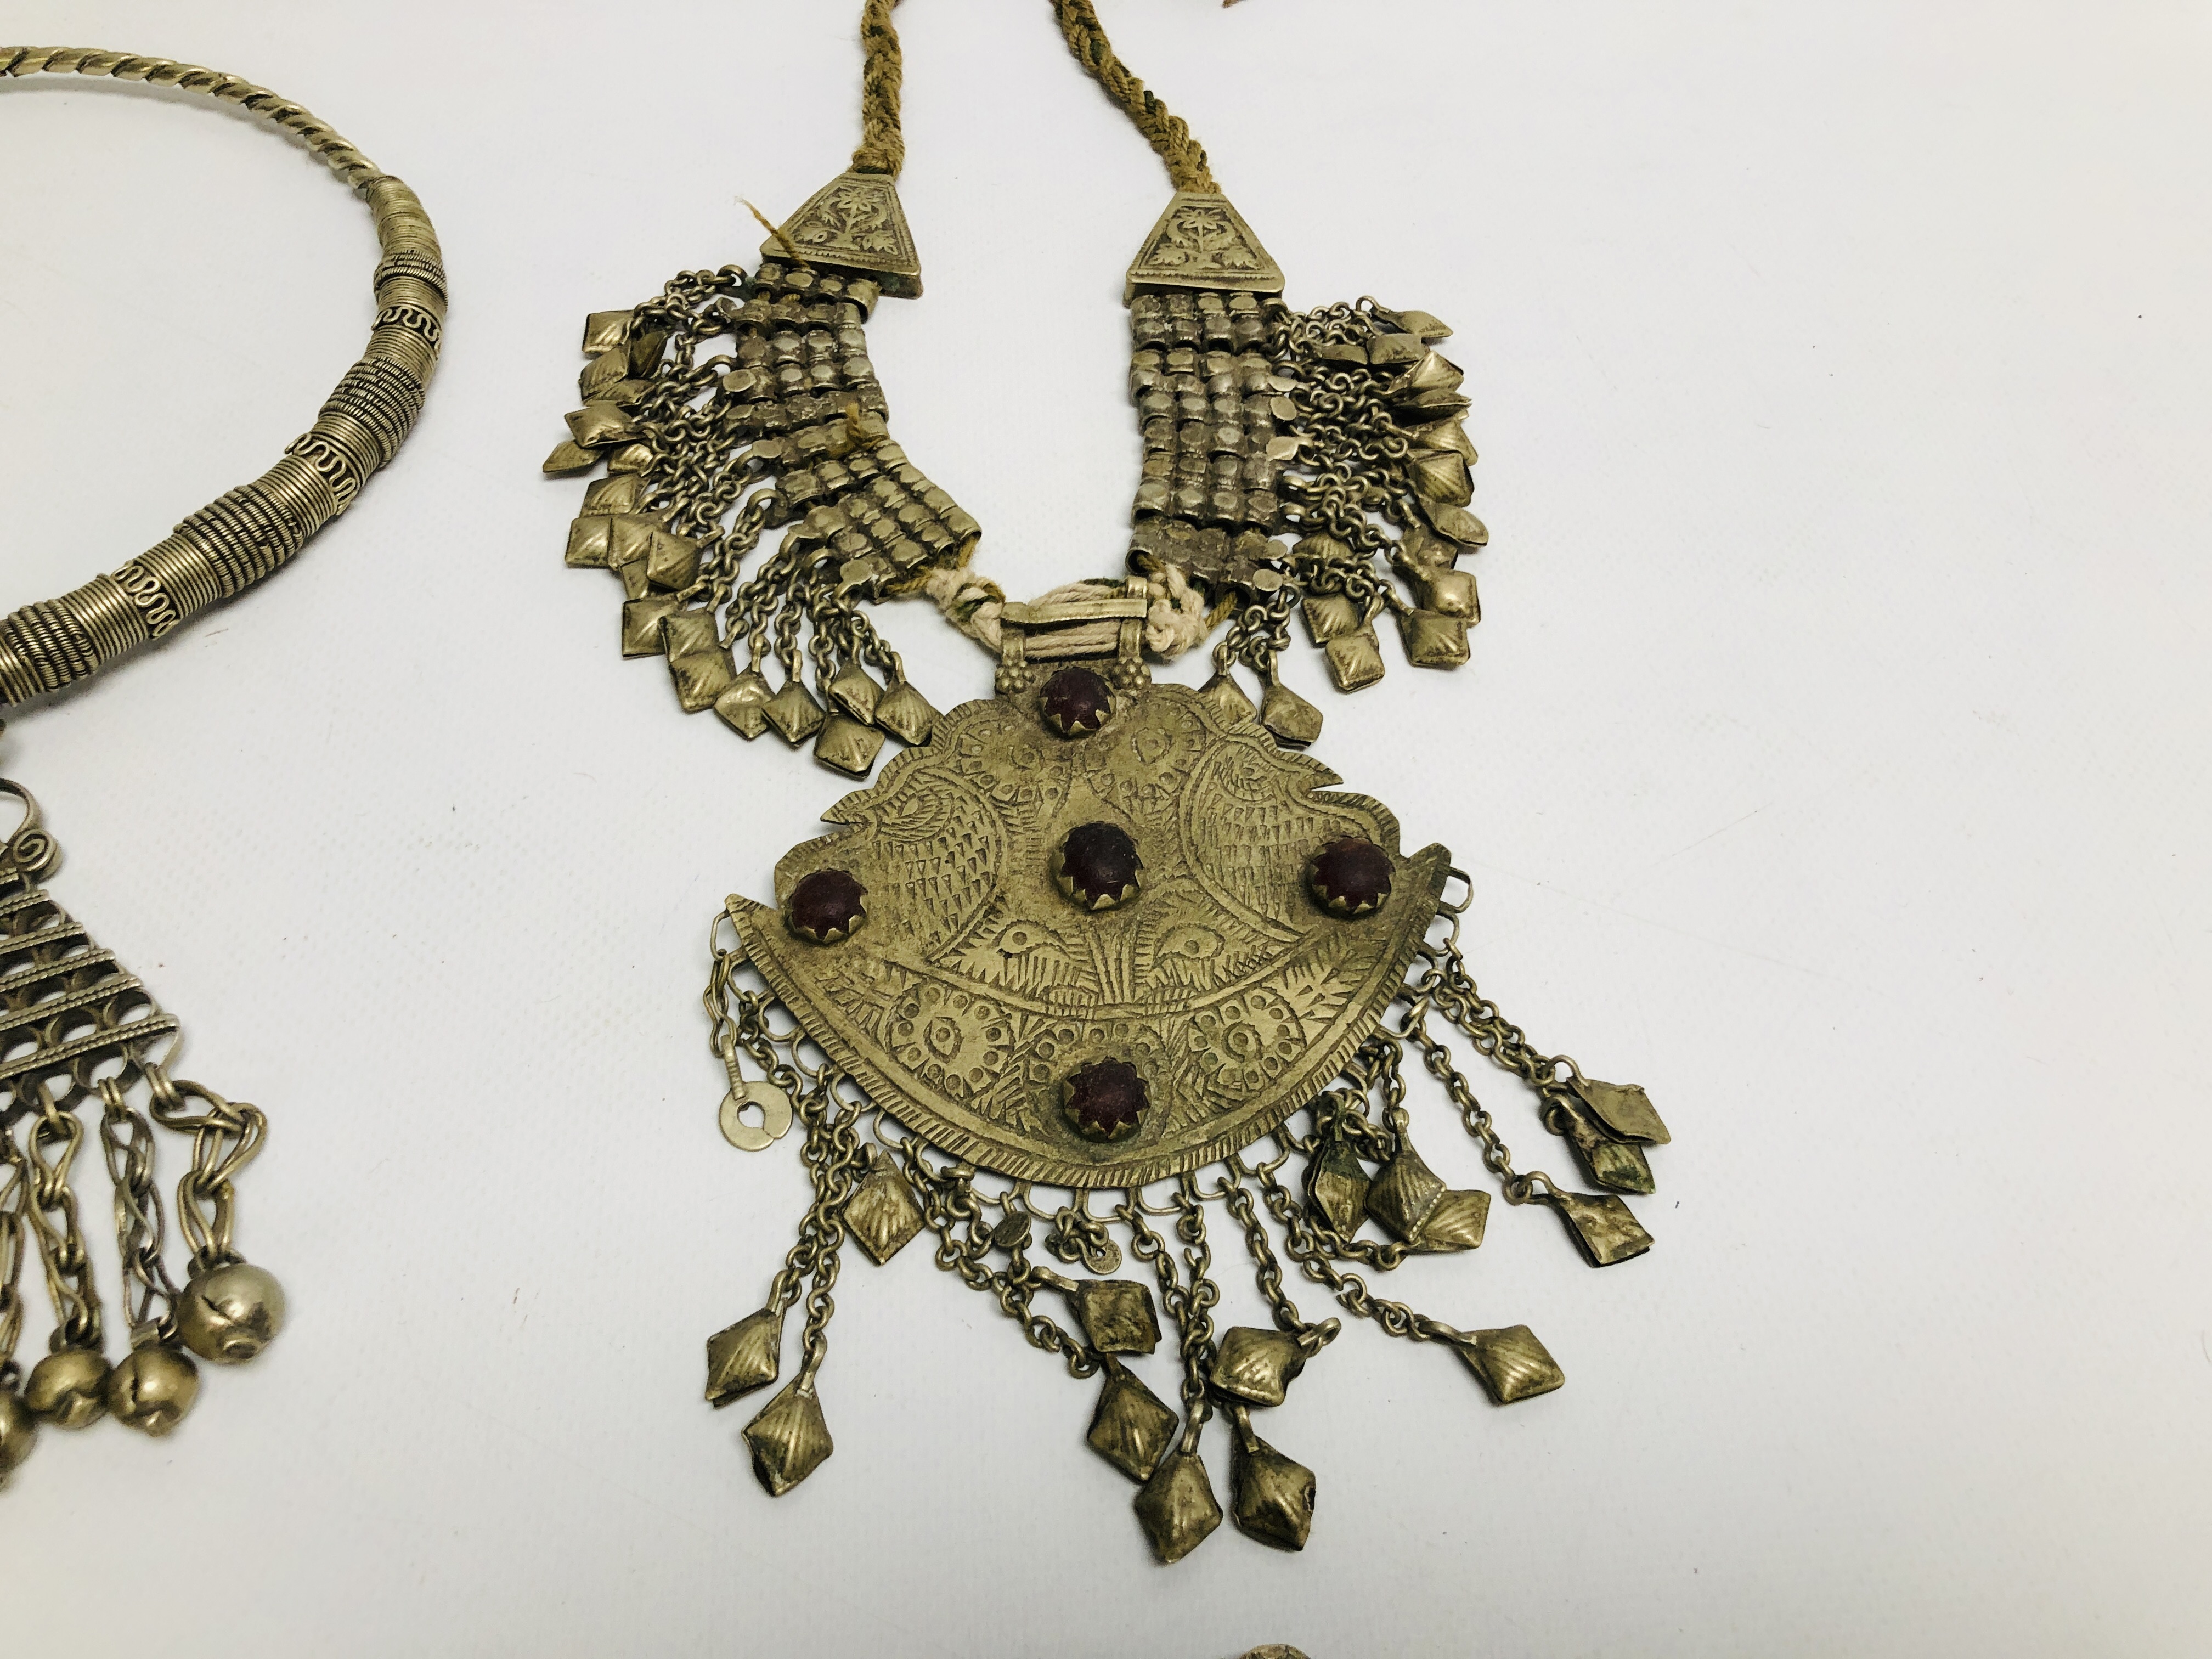 A GROUP OF 5 ELABORATE EASTERN STYLE WHITE METAL NECKLACES TO INCLUDE CHOKER EXAMPLES. - Image 5 of 8